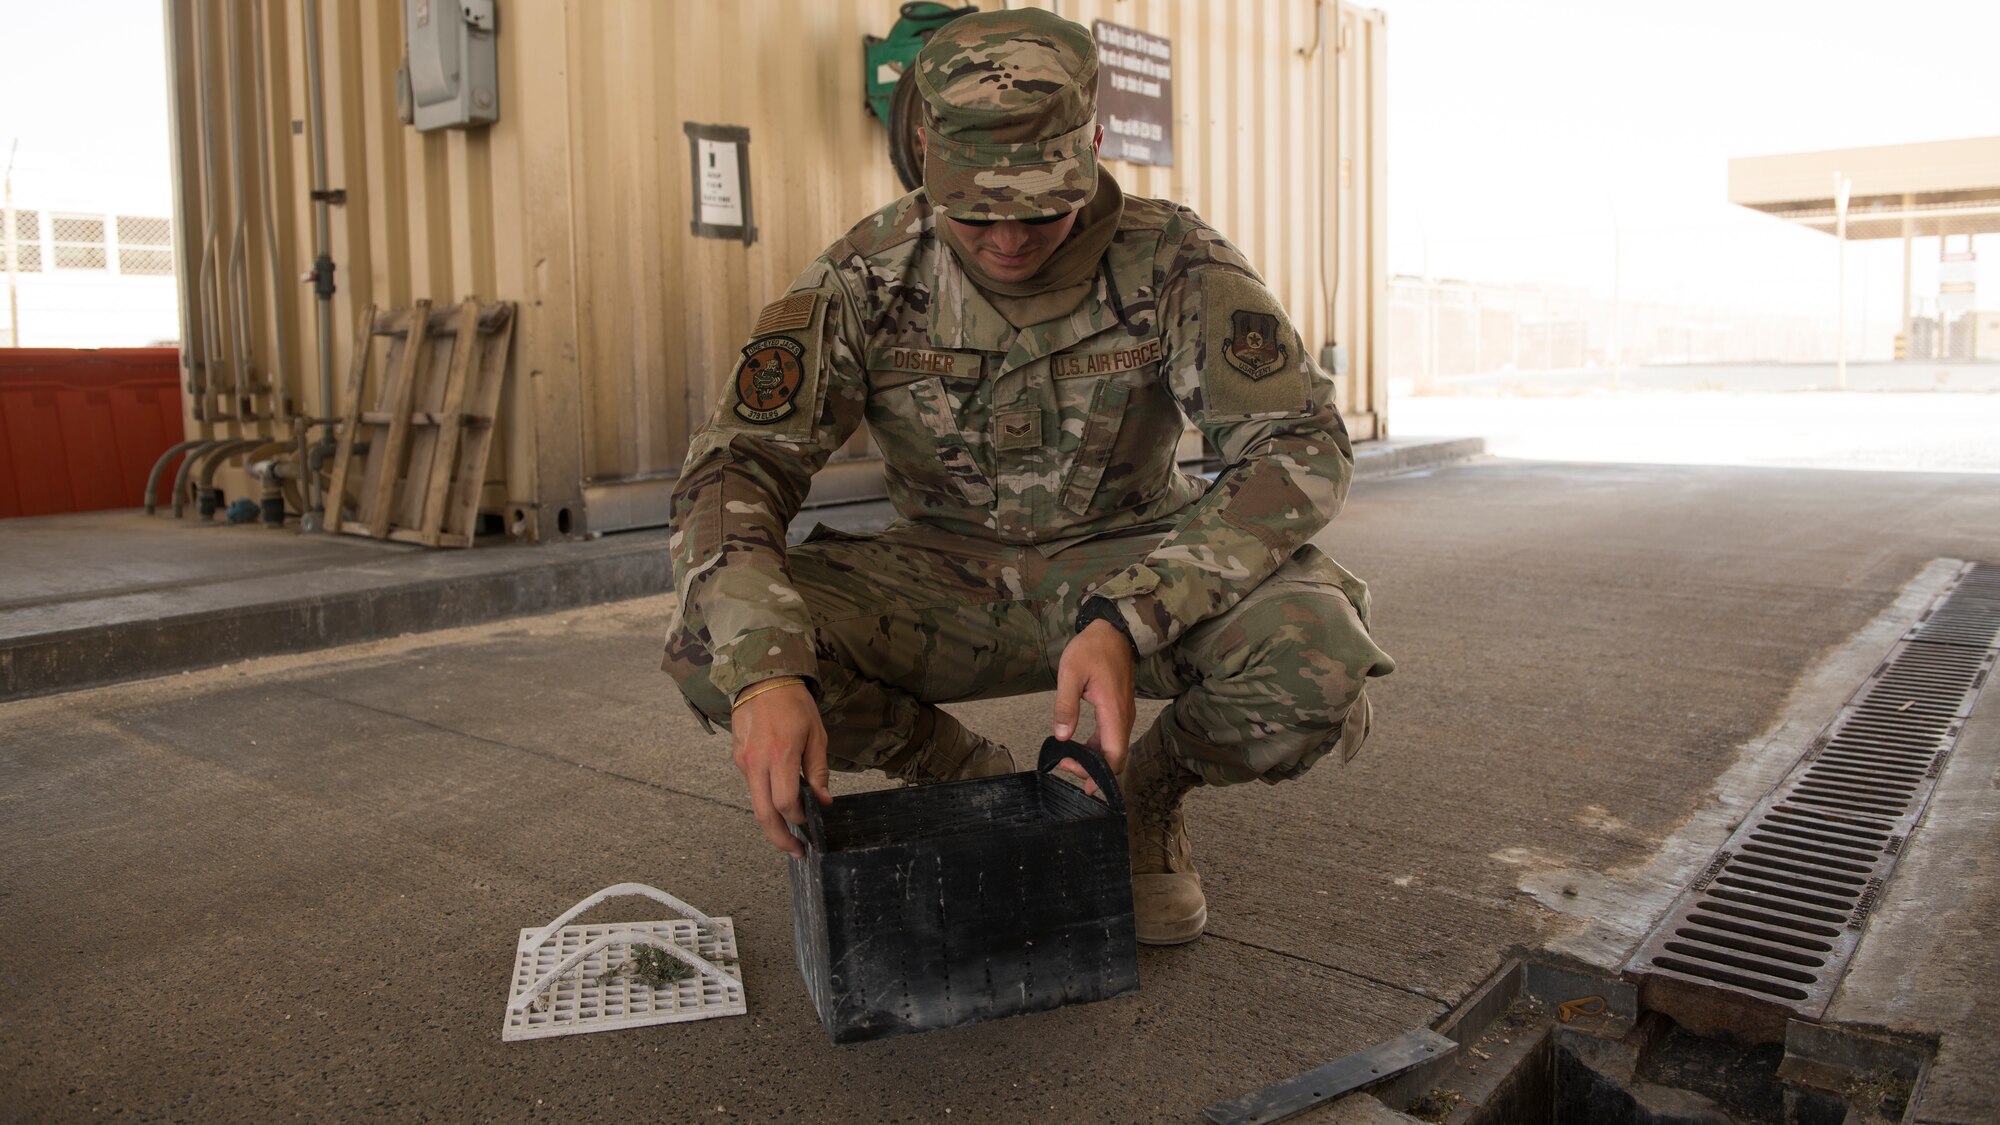 U.S. Air Force Senior Airman Ryan Disher, a vehicle operator assigned to the 379th Expeditionary Logistics Readiness Squadron, inspects a prototype drainage pan from a vehicle wash rack at Al Udeid Air Base, Qatar, June 13, 2020.